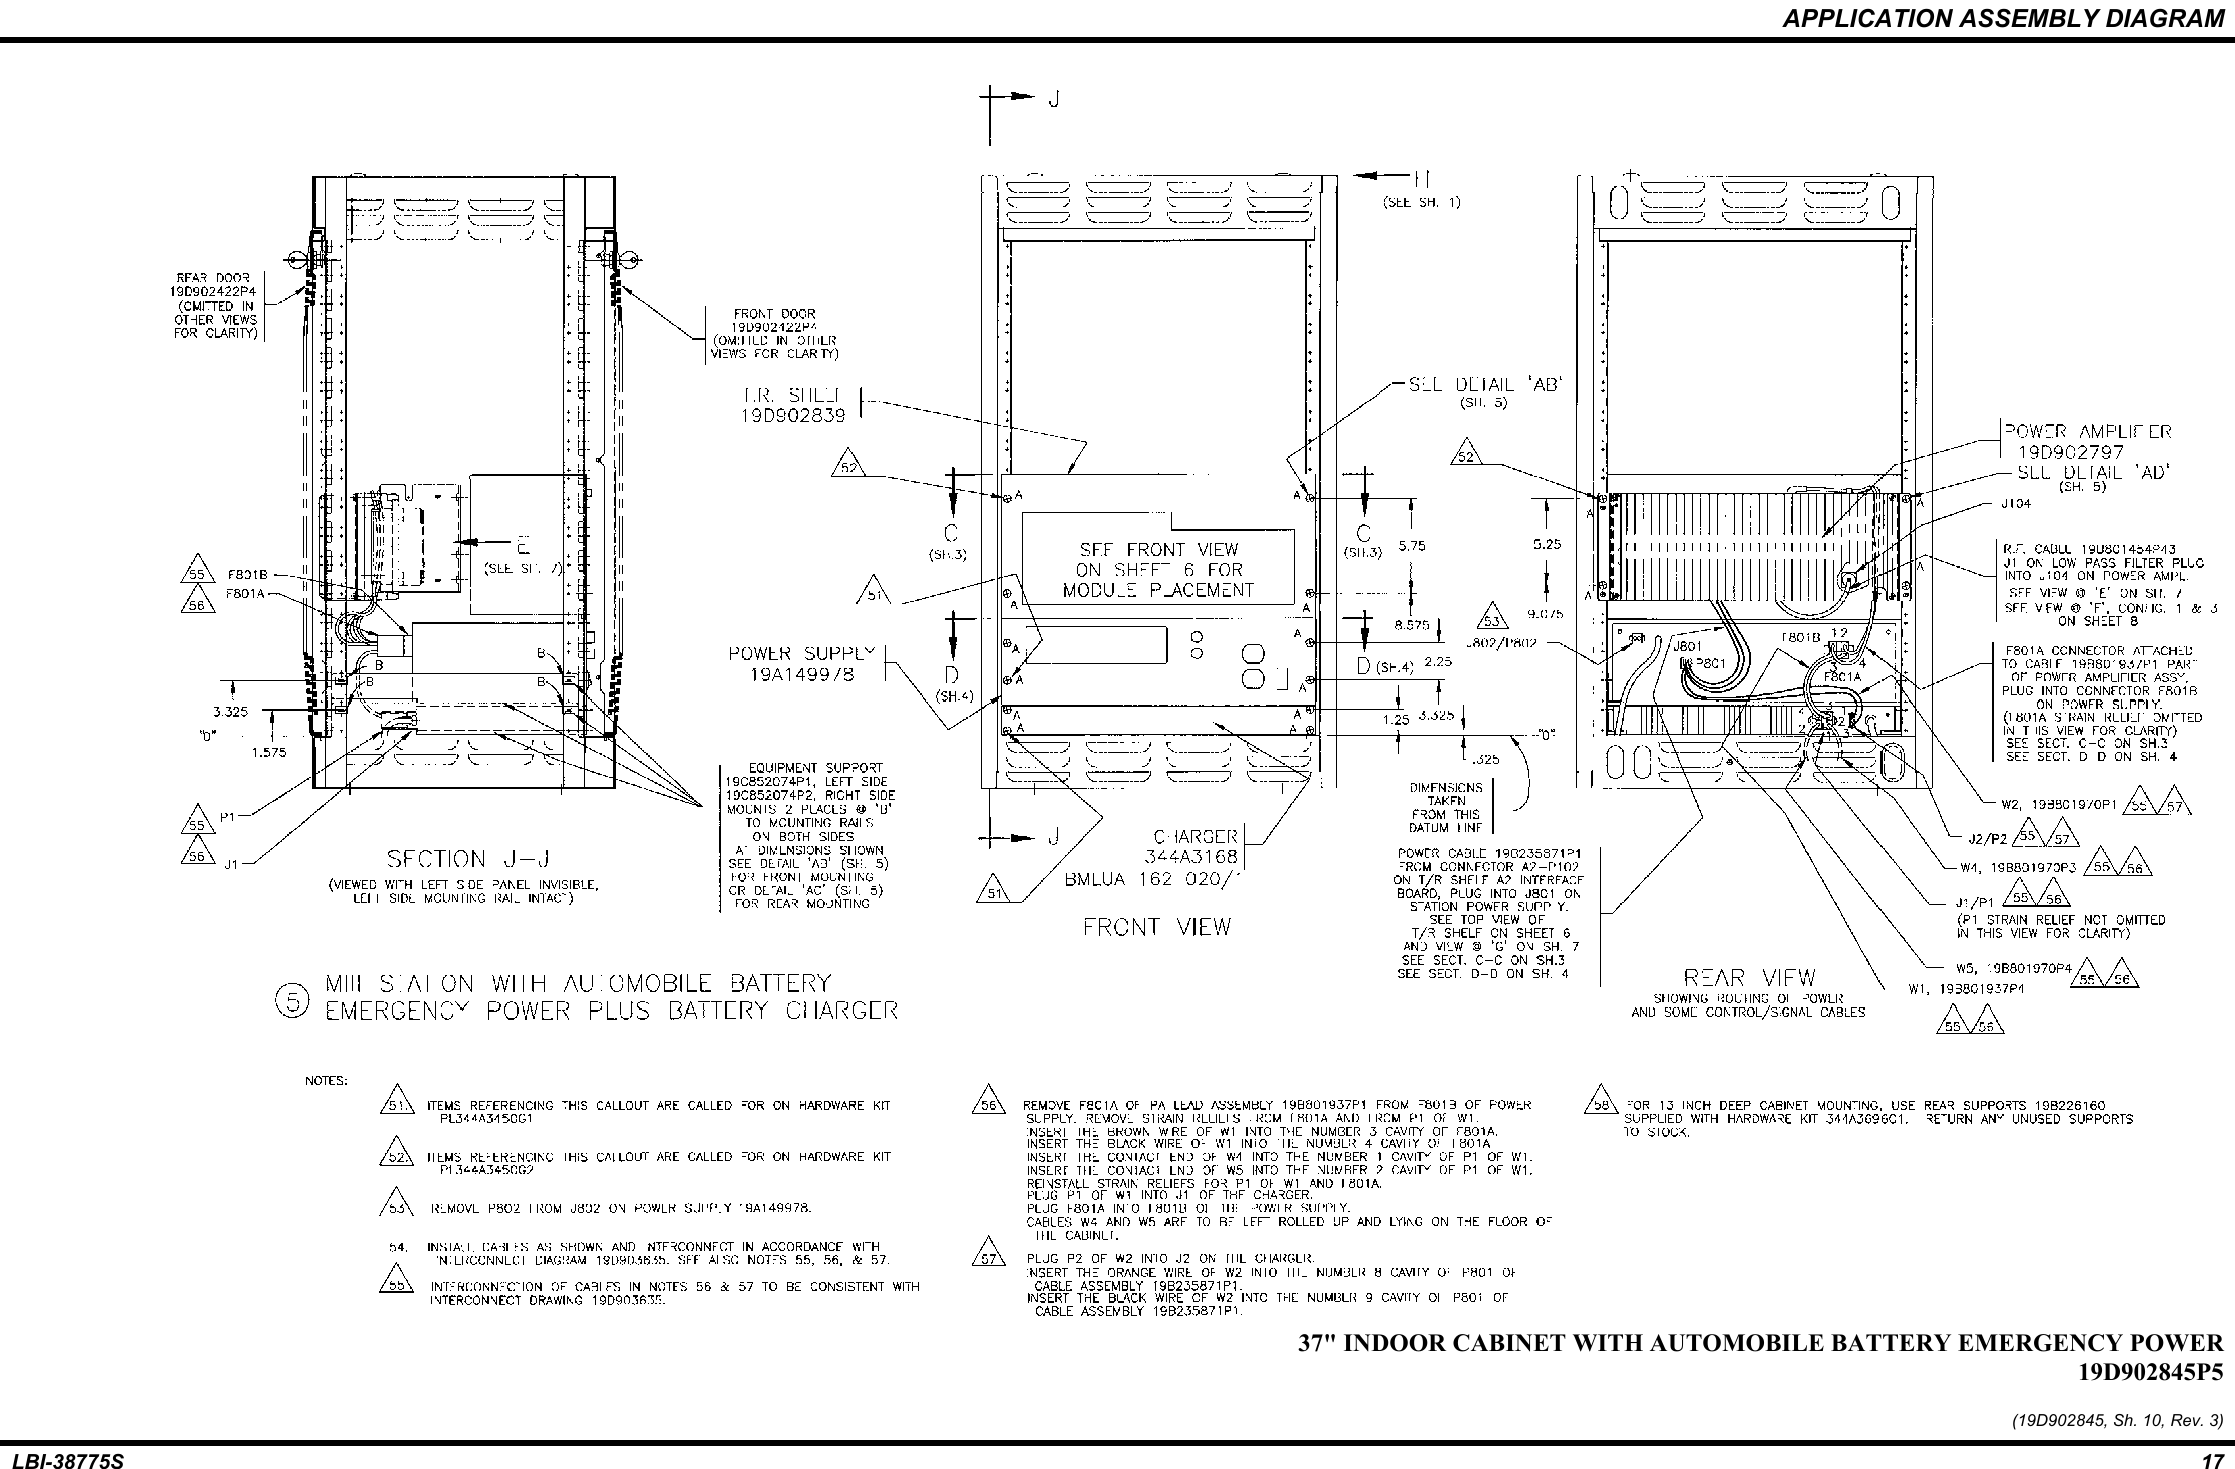 APPLICATION ASSEMBLY DIAGRAMLBI-38775S 1737&quot; INDOOR CABINET WITH AUTOMOBILE BATTERY EMERGENCY POWER19D902845P5(19D902845, Sh. 10, Rev. 3)